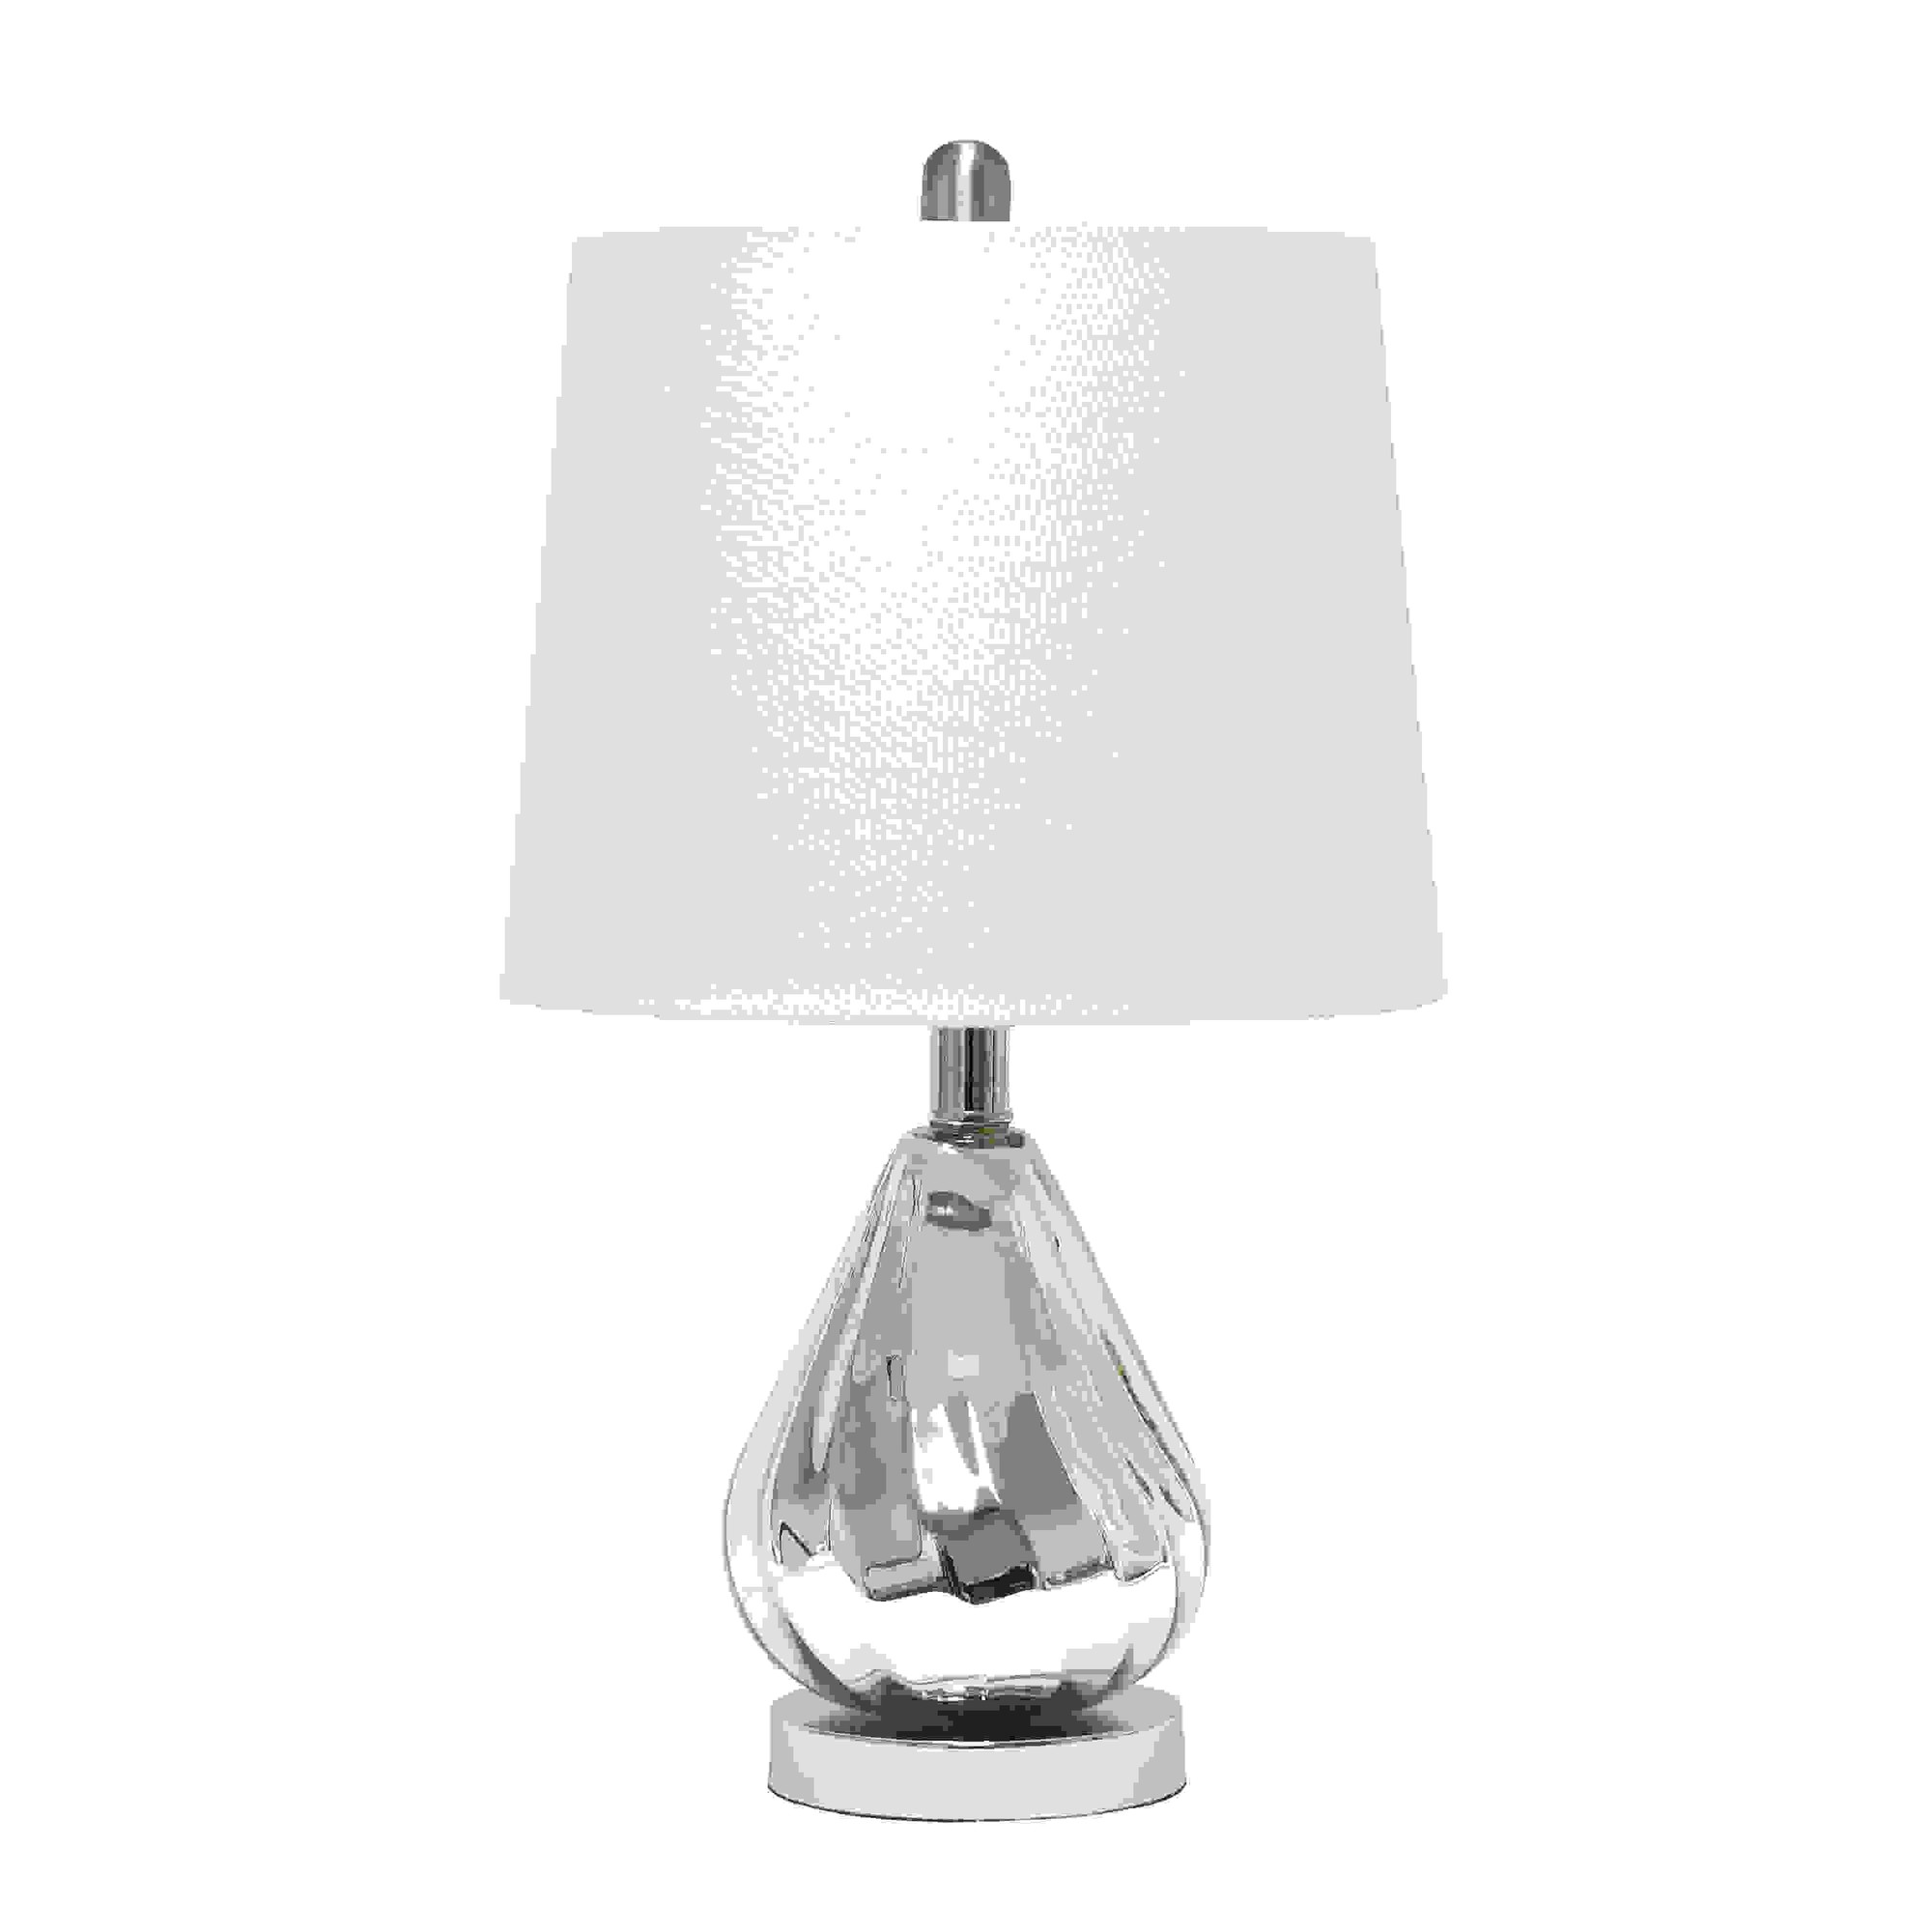 Lalia Home Kissy Pear Table Lamp with White Fabric Shade